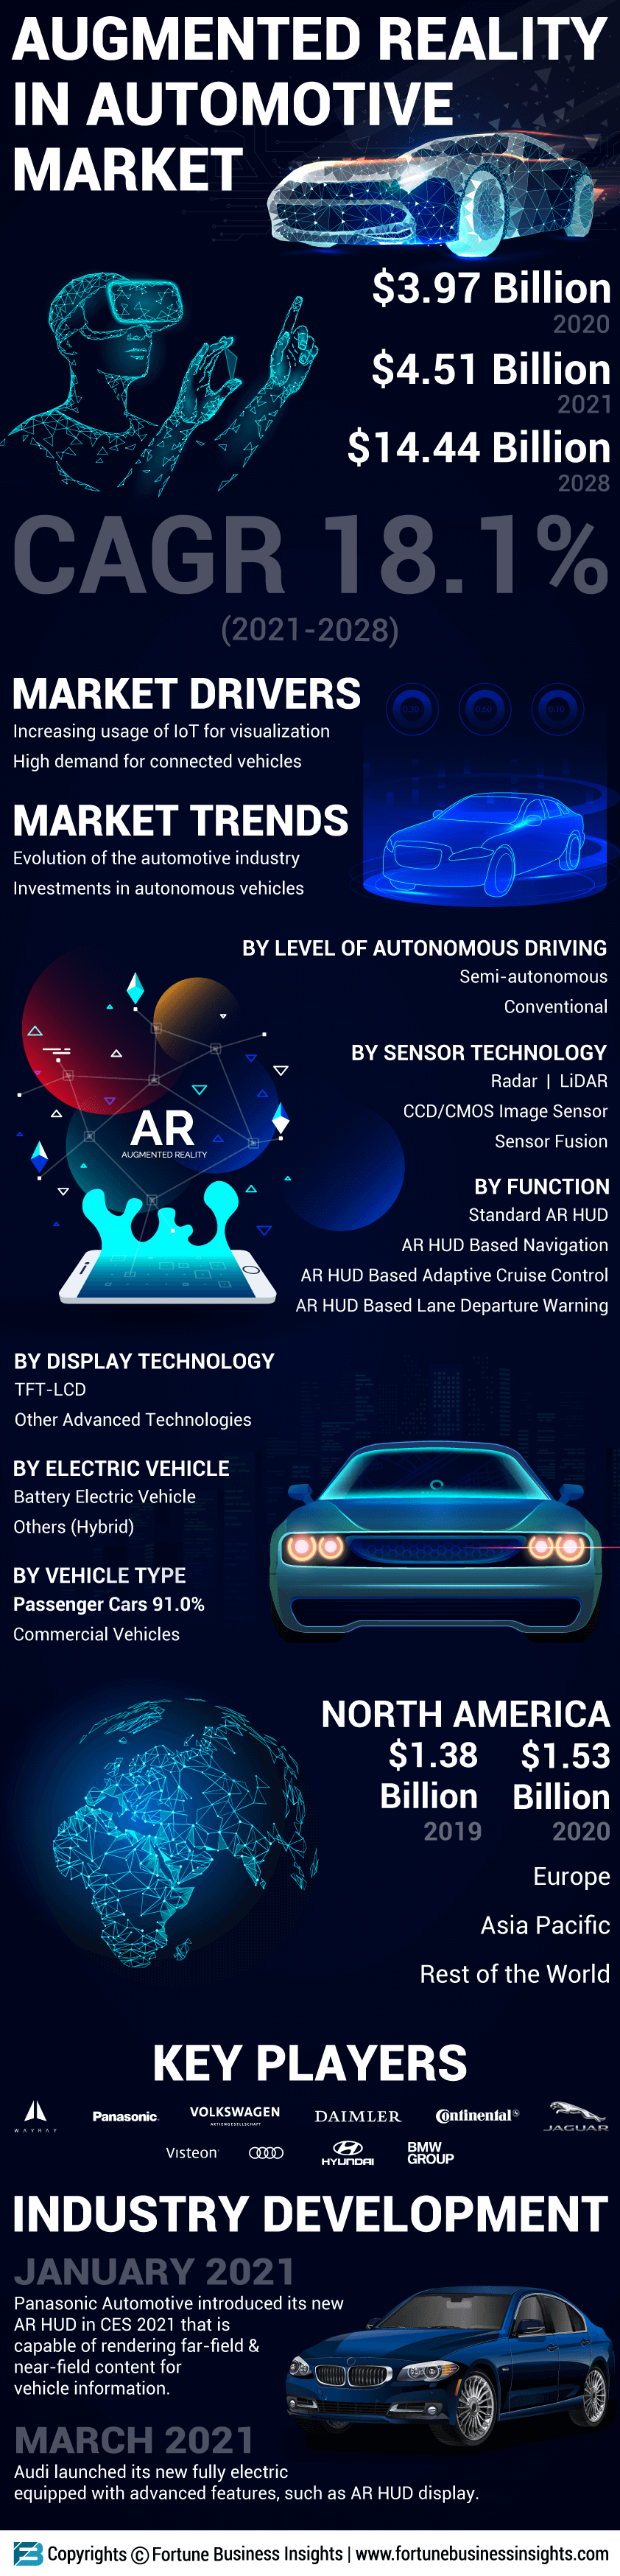 Augmented Reality (AR) in Automotive Market